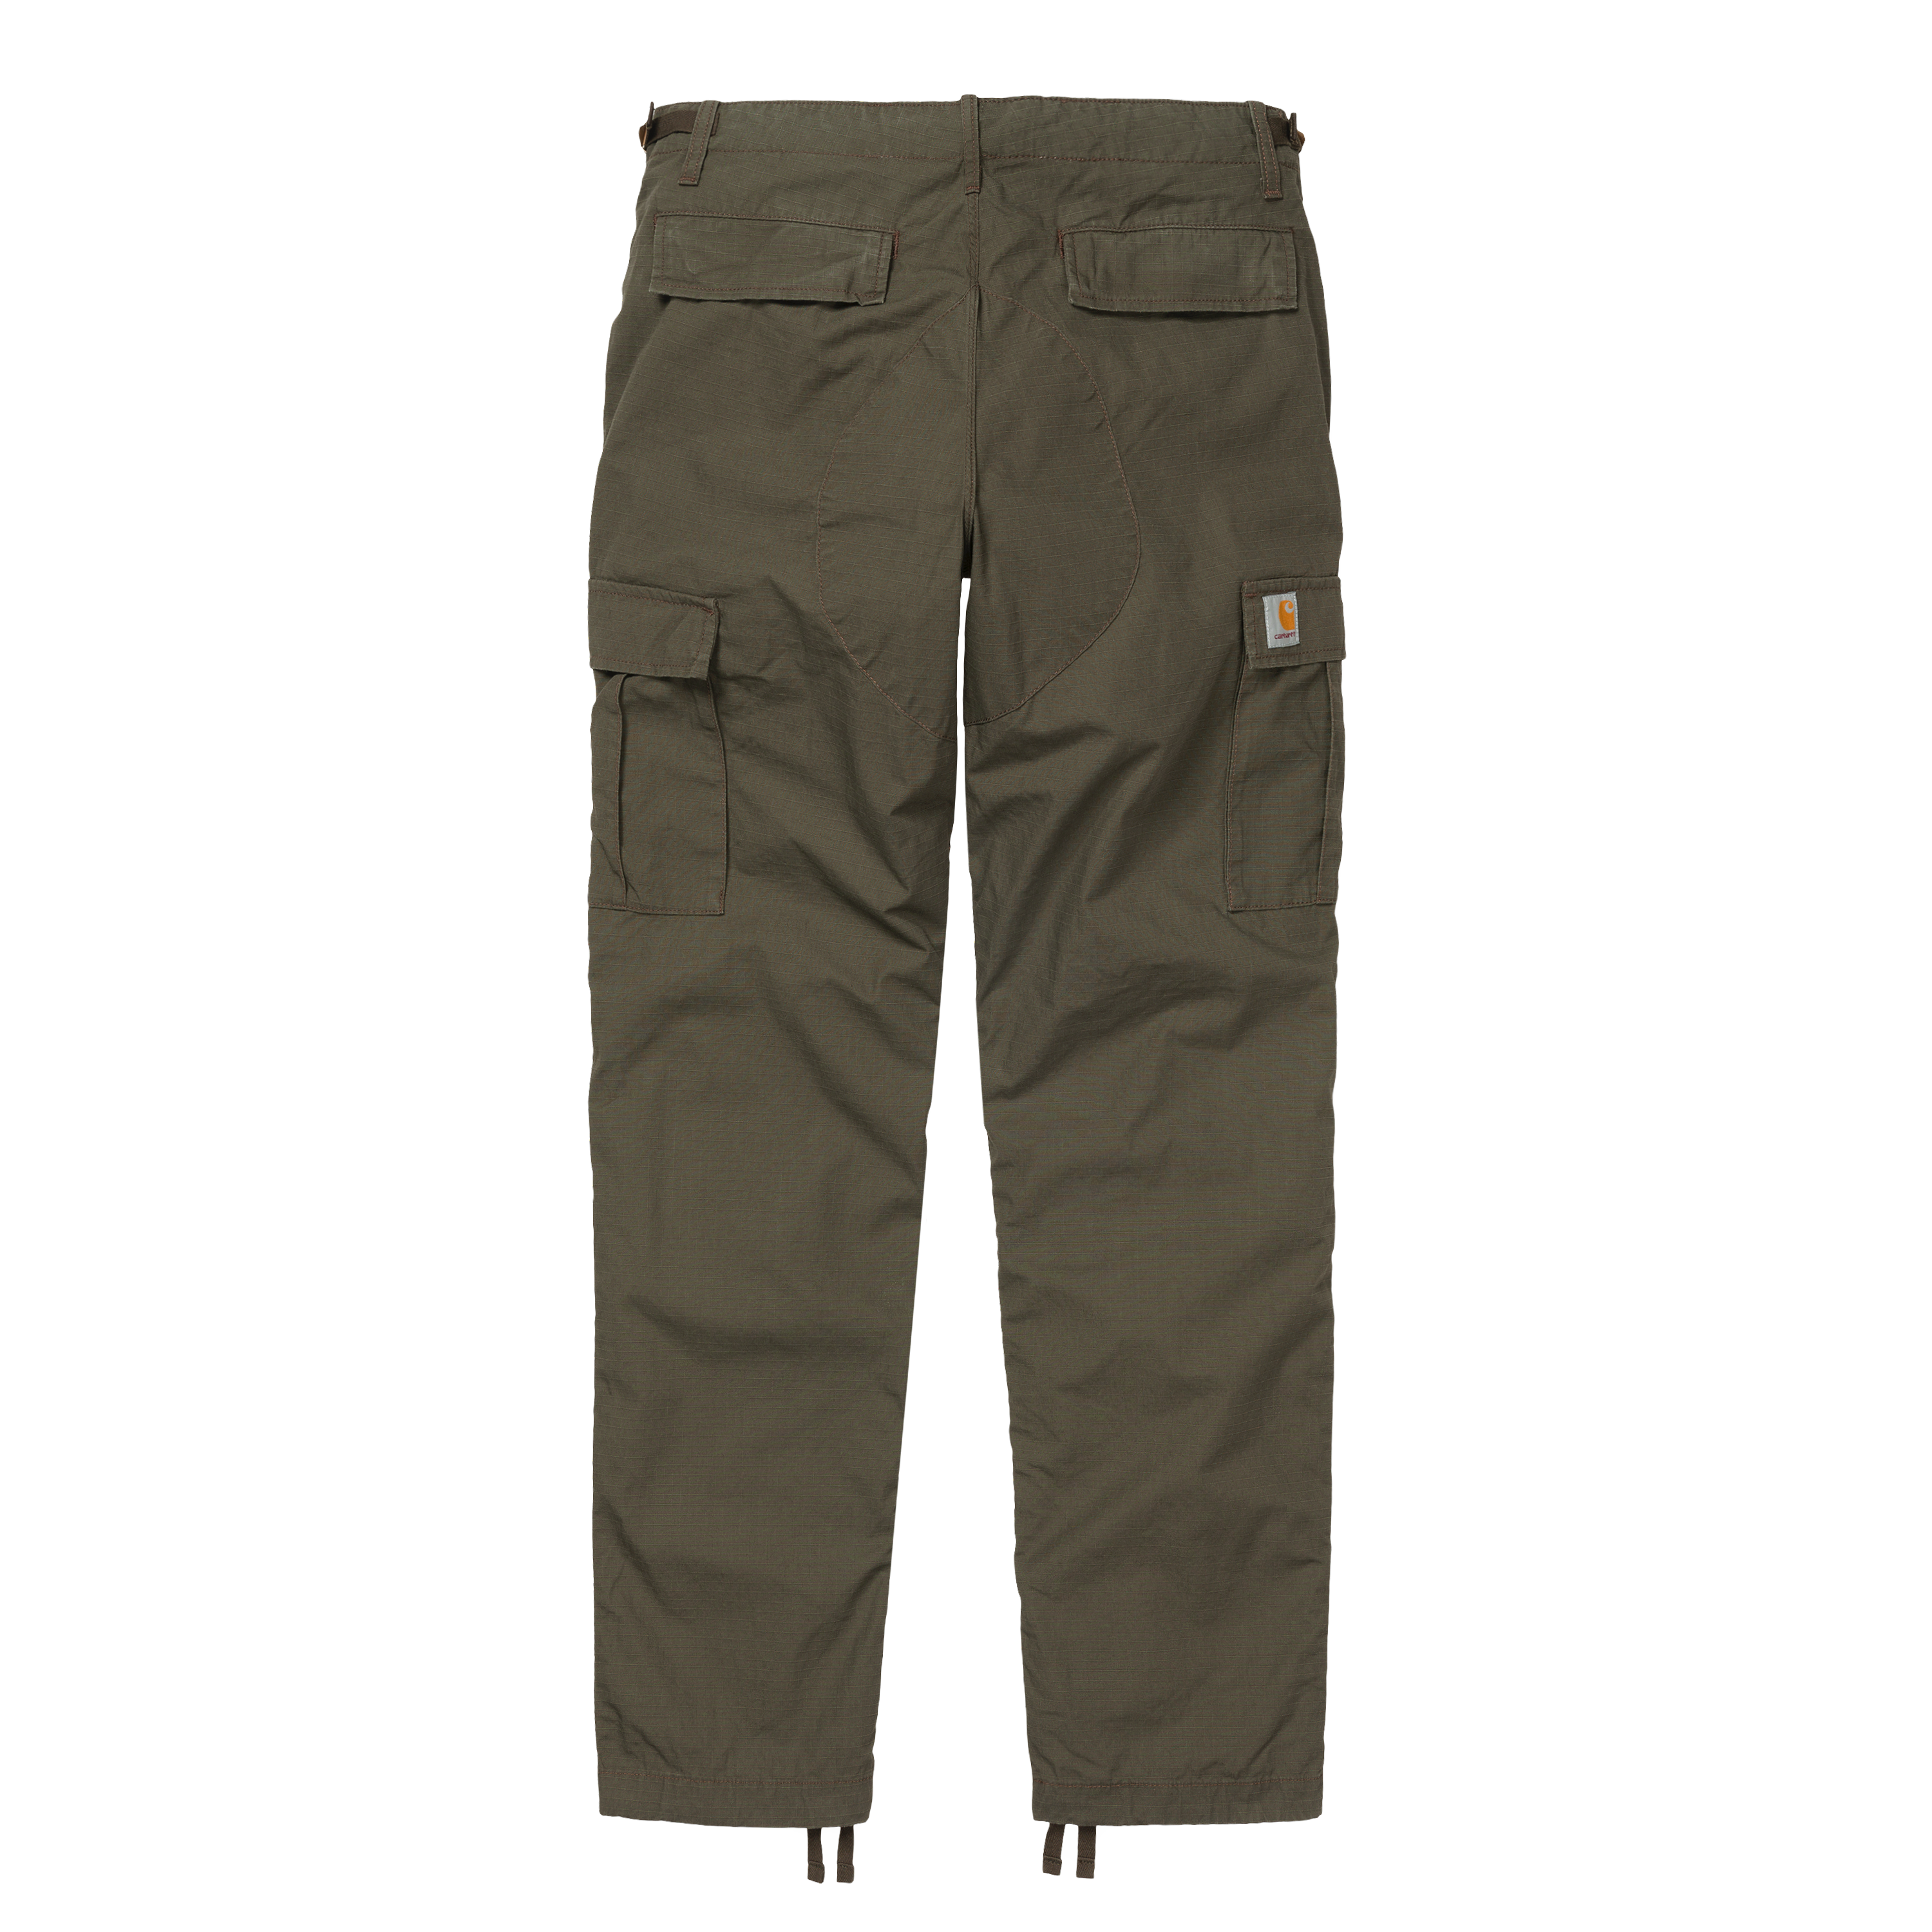 Womens Clothing Trousers Carhartt Wip Aviation Cargo Pant in Black Slacks and Chinos Cargo trousers 